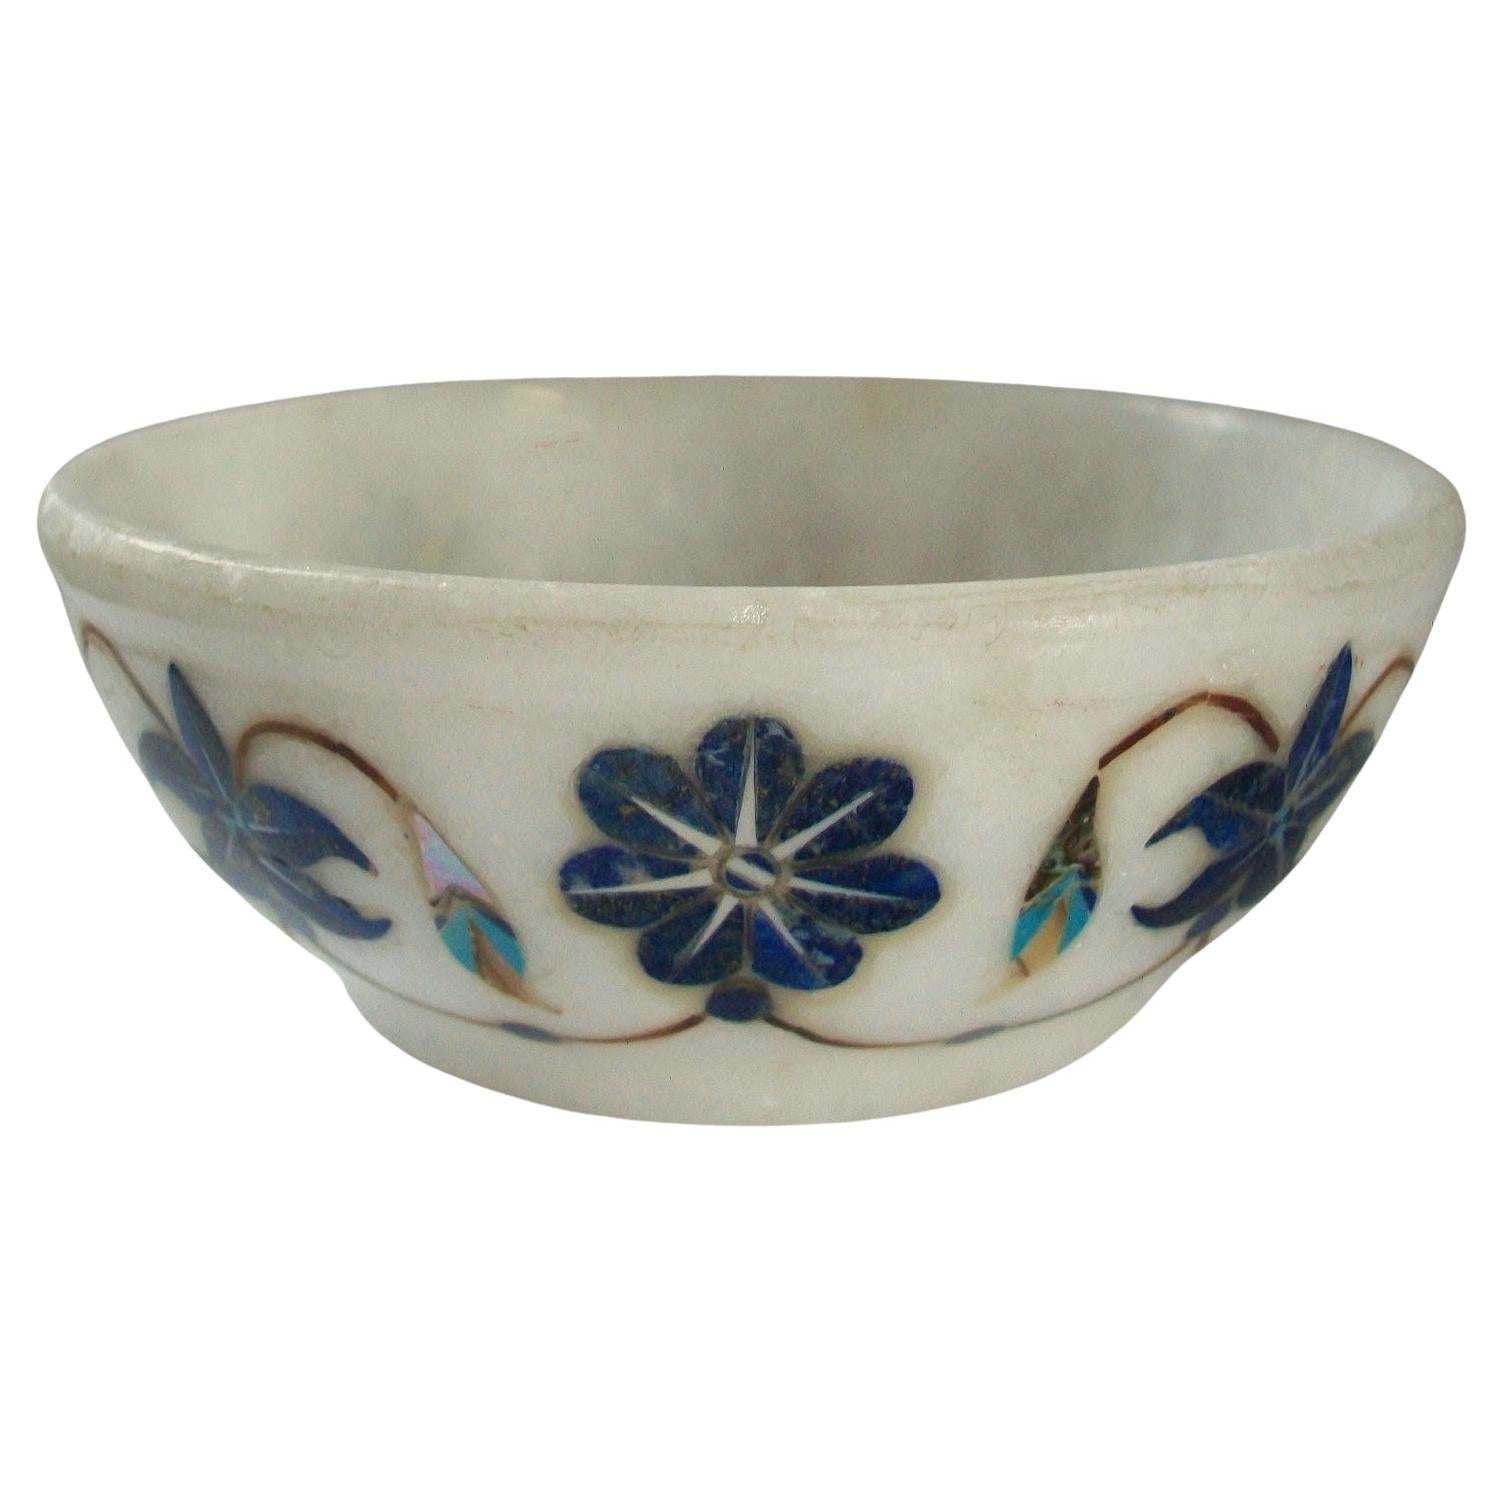 Mughal Style Pietra Dura Marble Bowl with Stone Inlay, India, Mid-20th Century